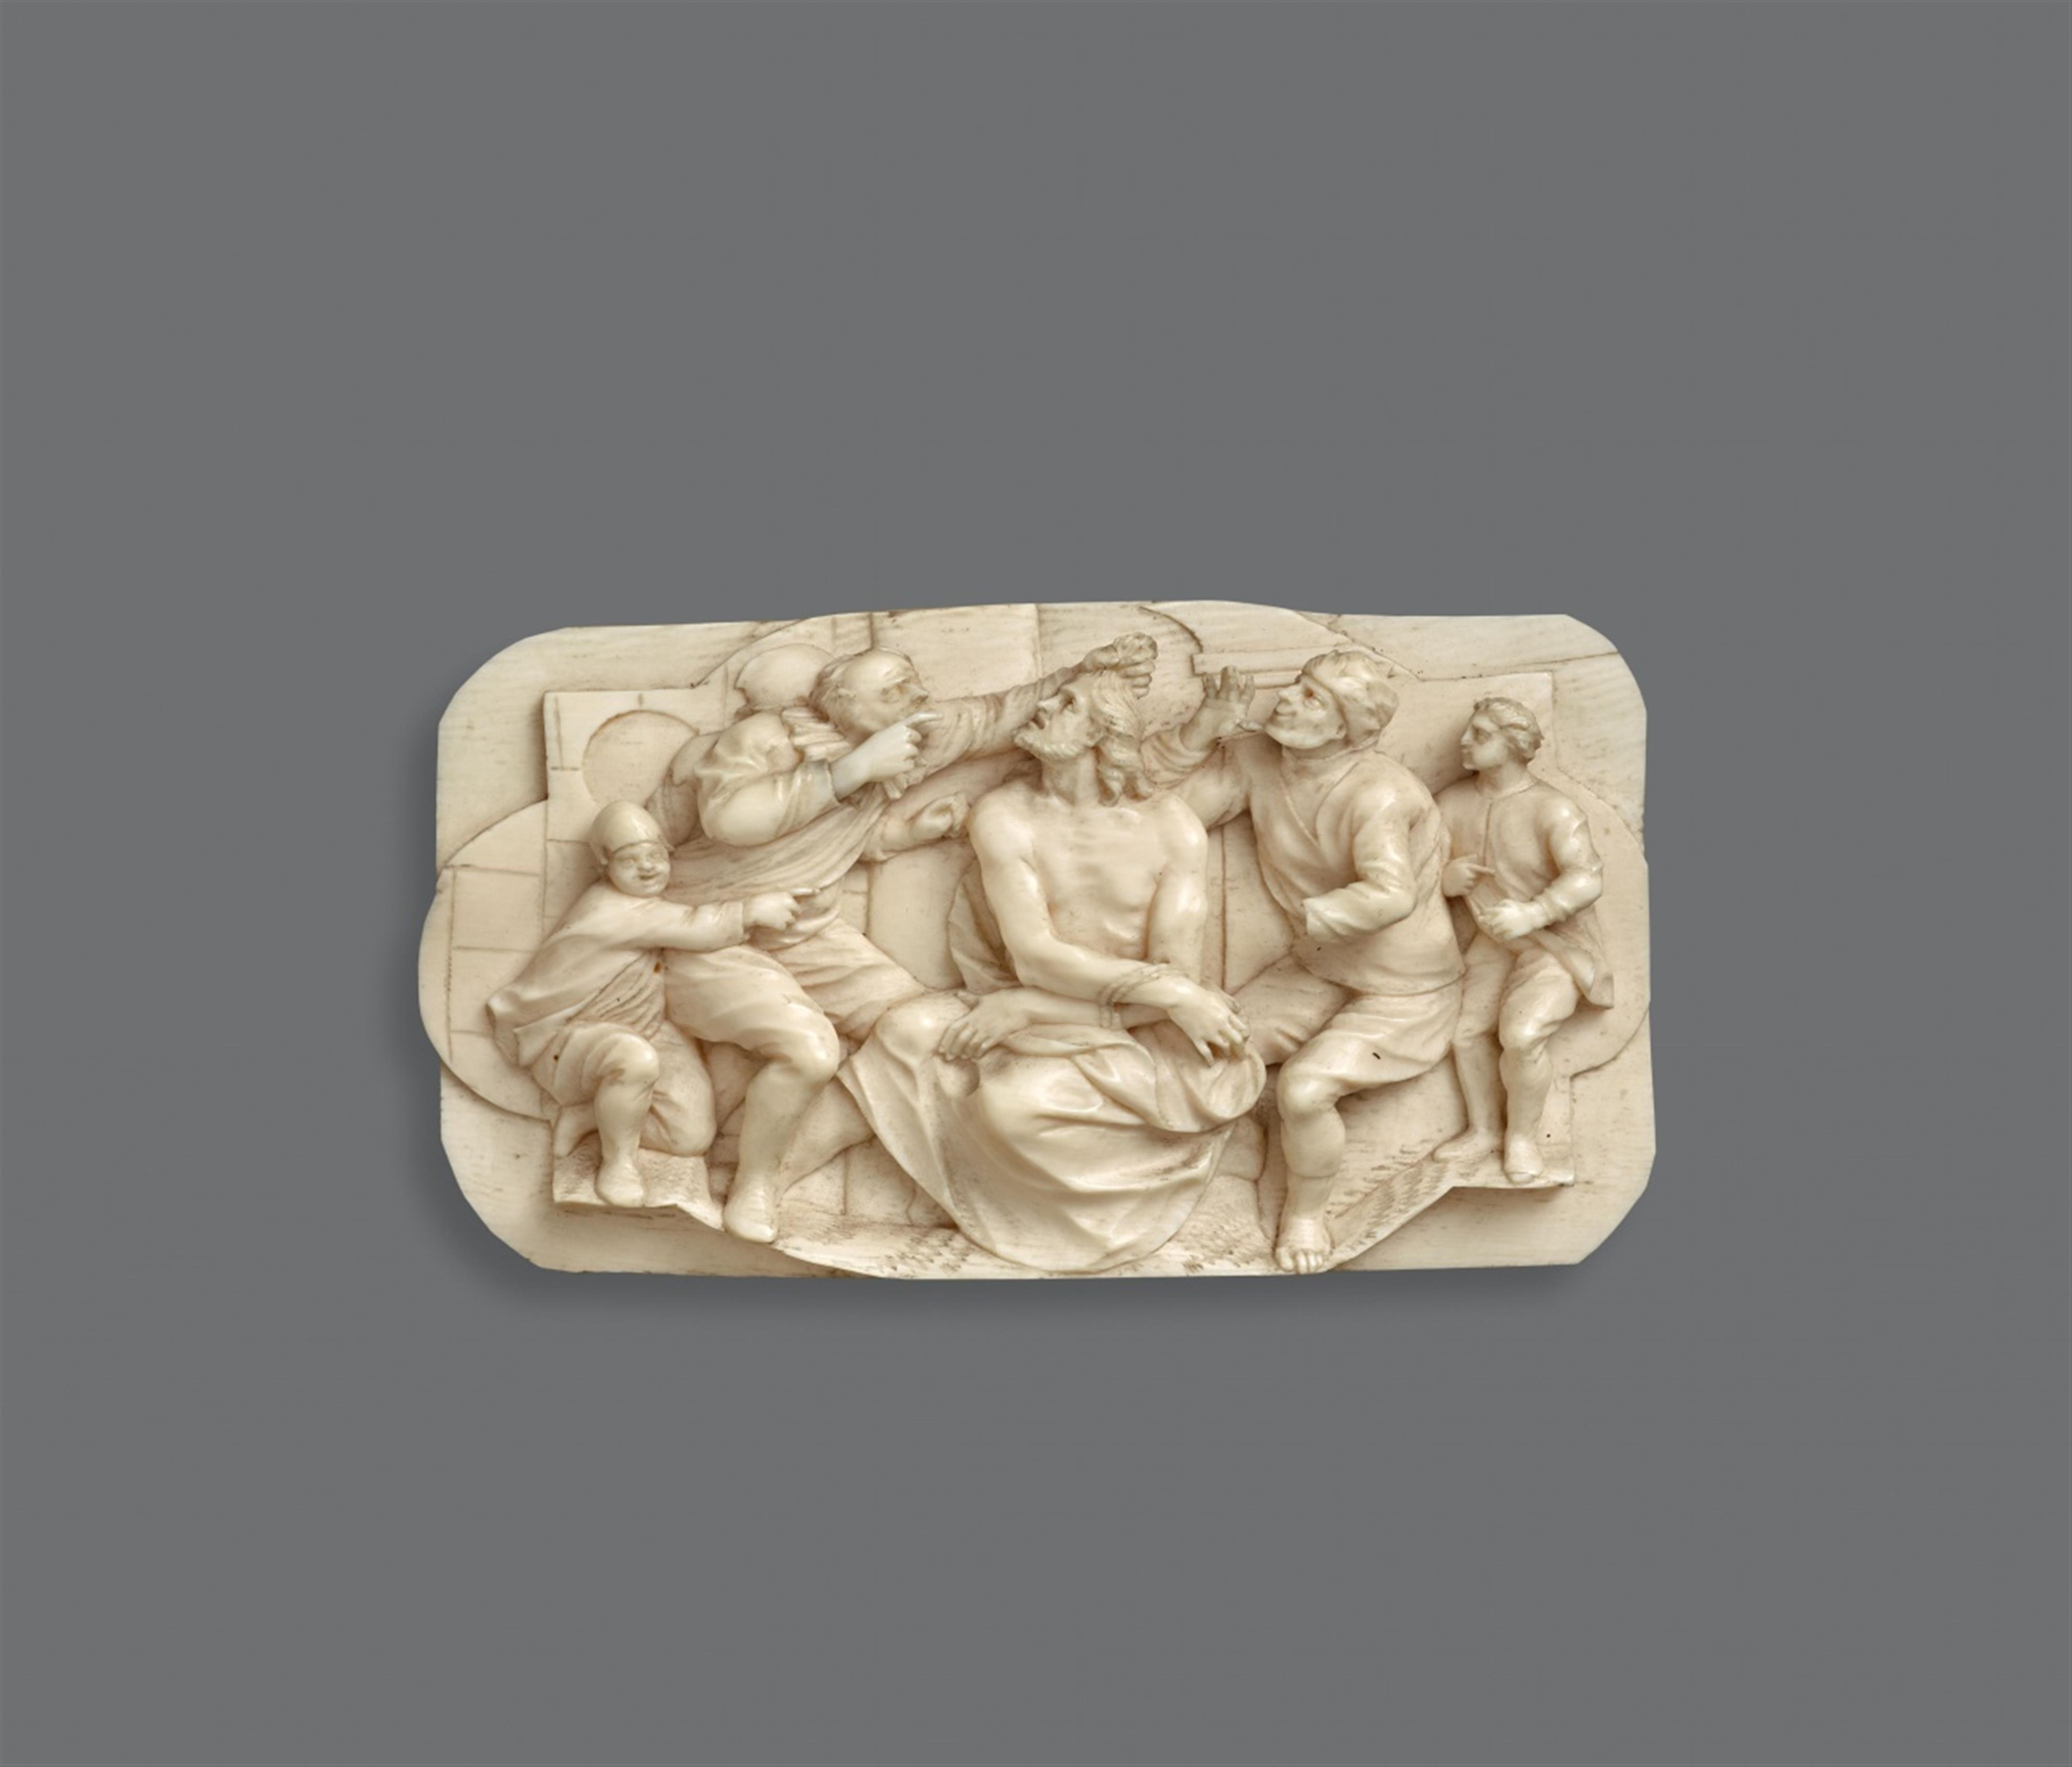 South German 17th century - A 17th century South German carved ivory relief of Christ mocked - image-1